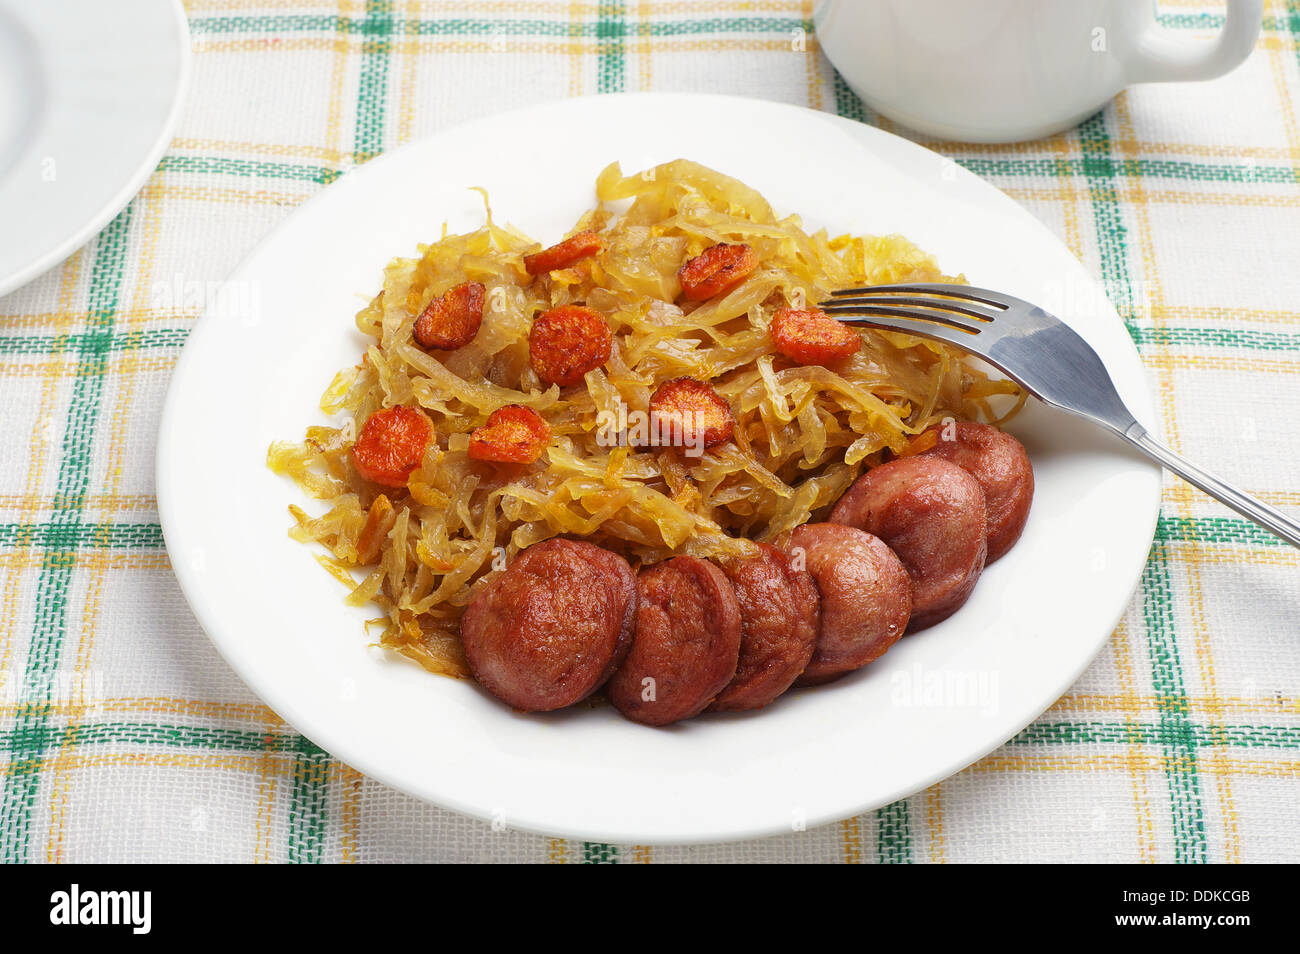 Grilled sausage with braised cabbage on a table Stock Photo